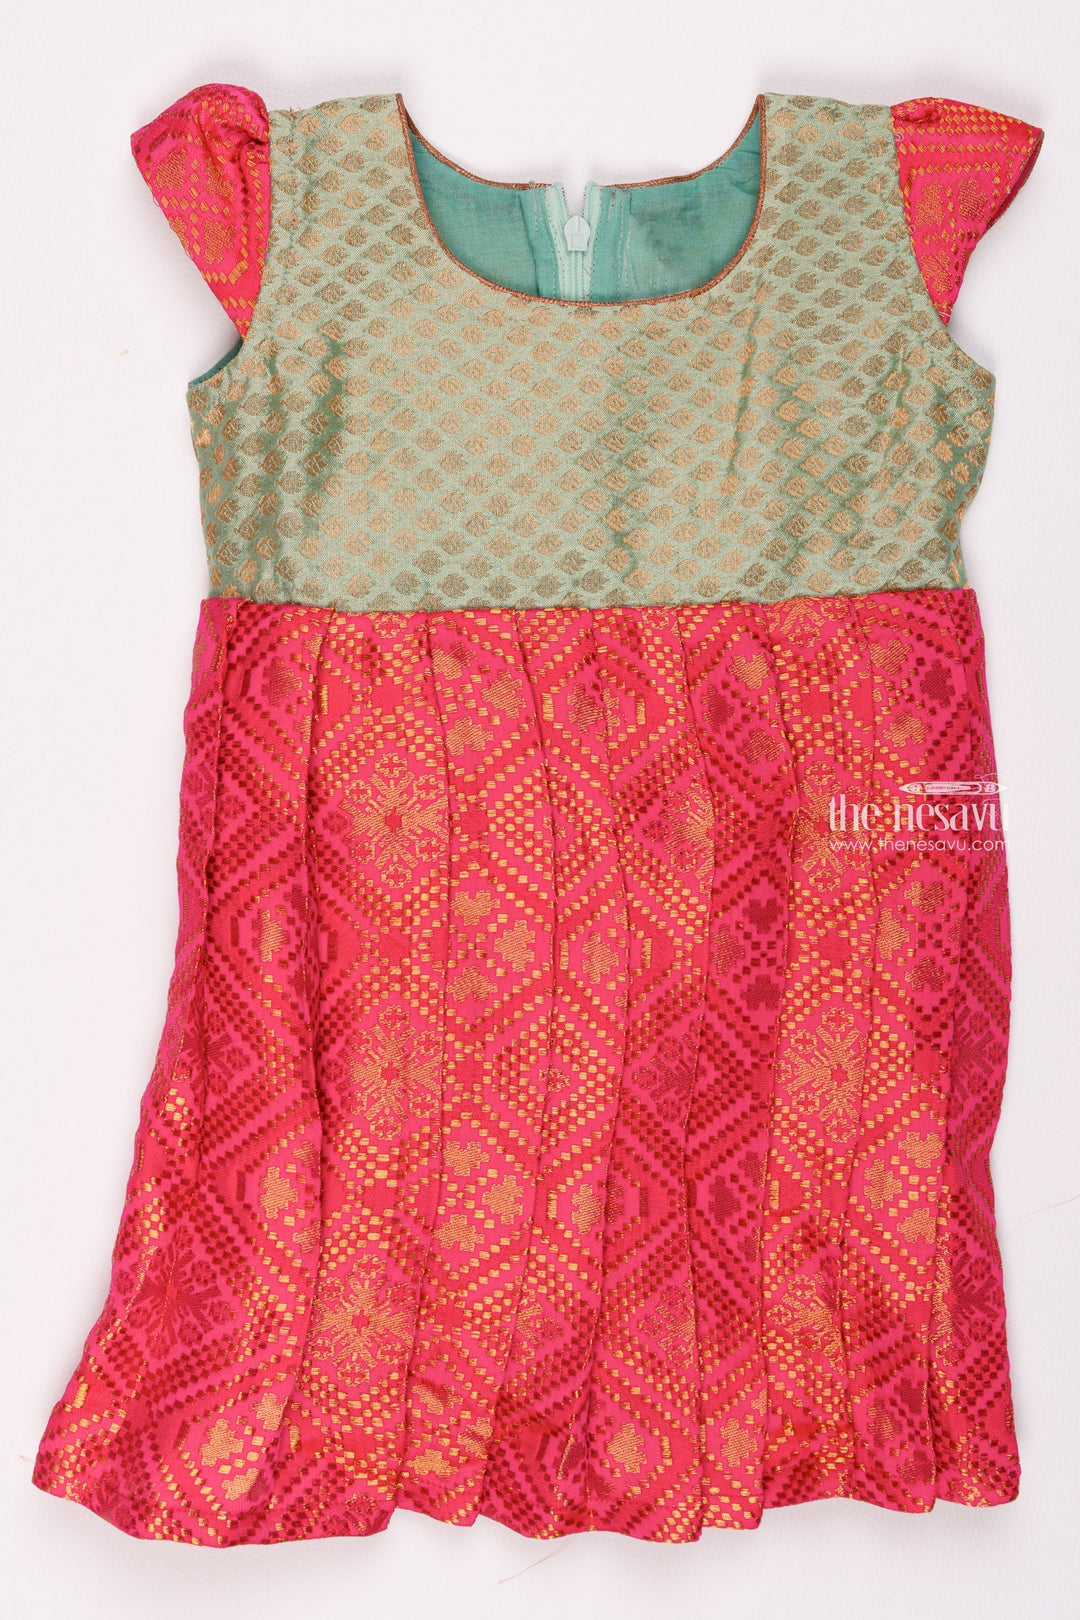 The Nesavu Silk Frock Pretty Pink Patola Pleated Ensemble with Green Brocade Brilliance A Fusion of Traditions for Young Divas Nesavu 16 (1Y) / Pink / Banarasi SF700-16 Baby Indian Silk Frock | Pattu Frock Baby 1 yr | The Nesavu